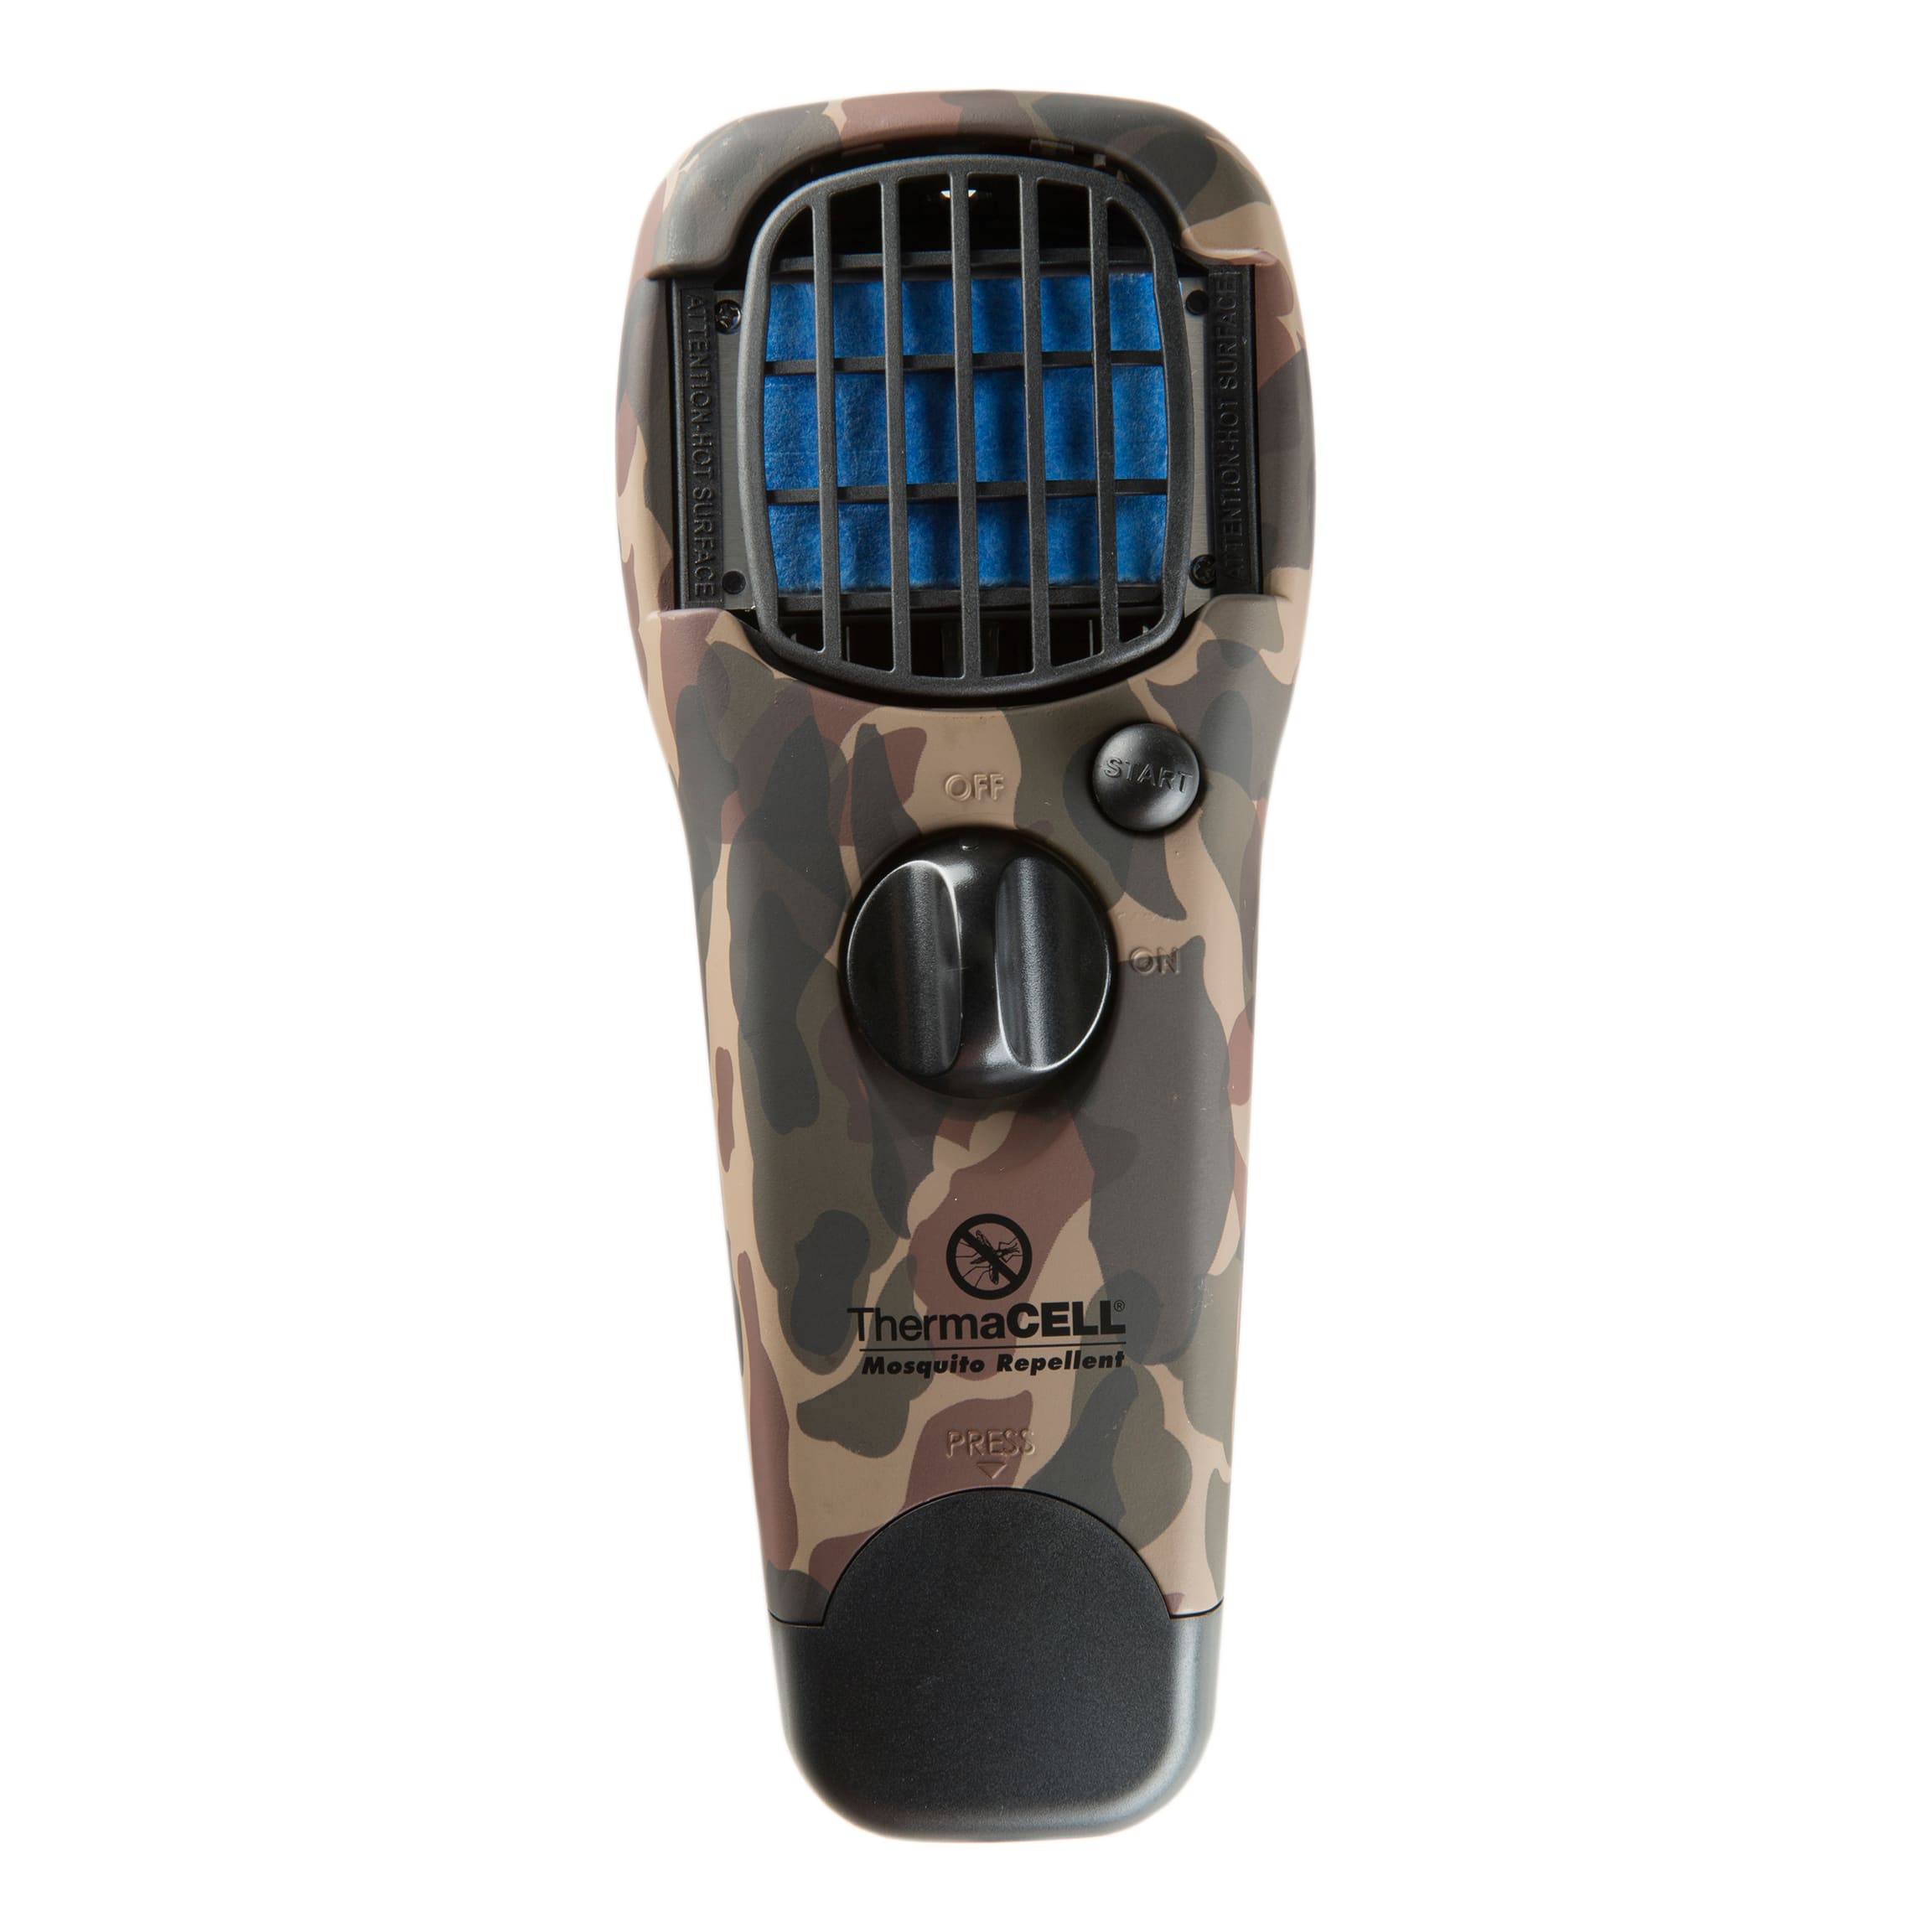 ThermaCELL Mosquito Repellent Appliances - Woodlands Camo